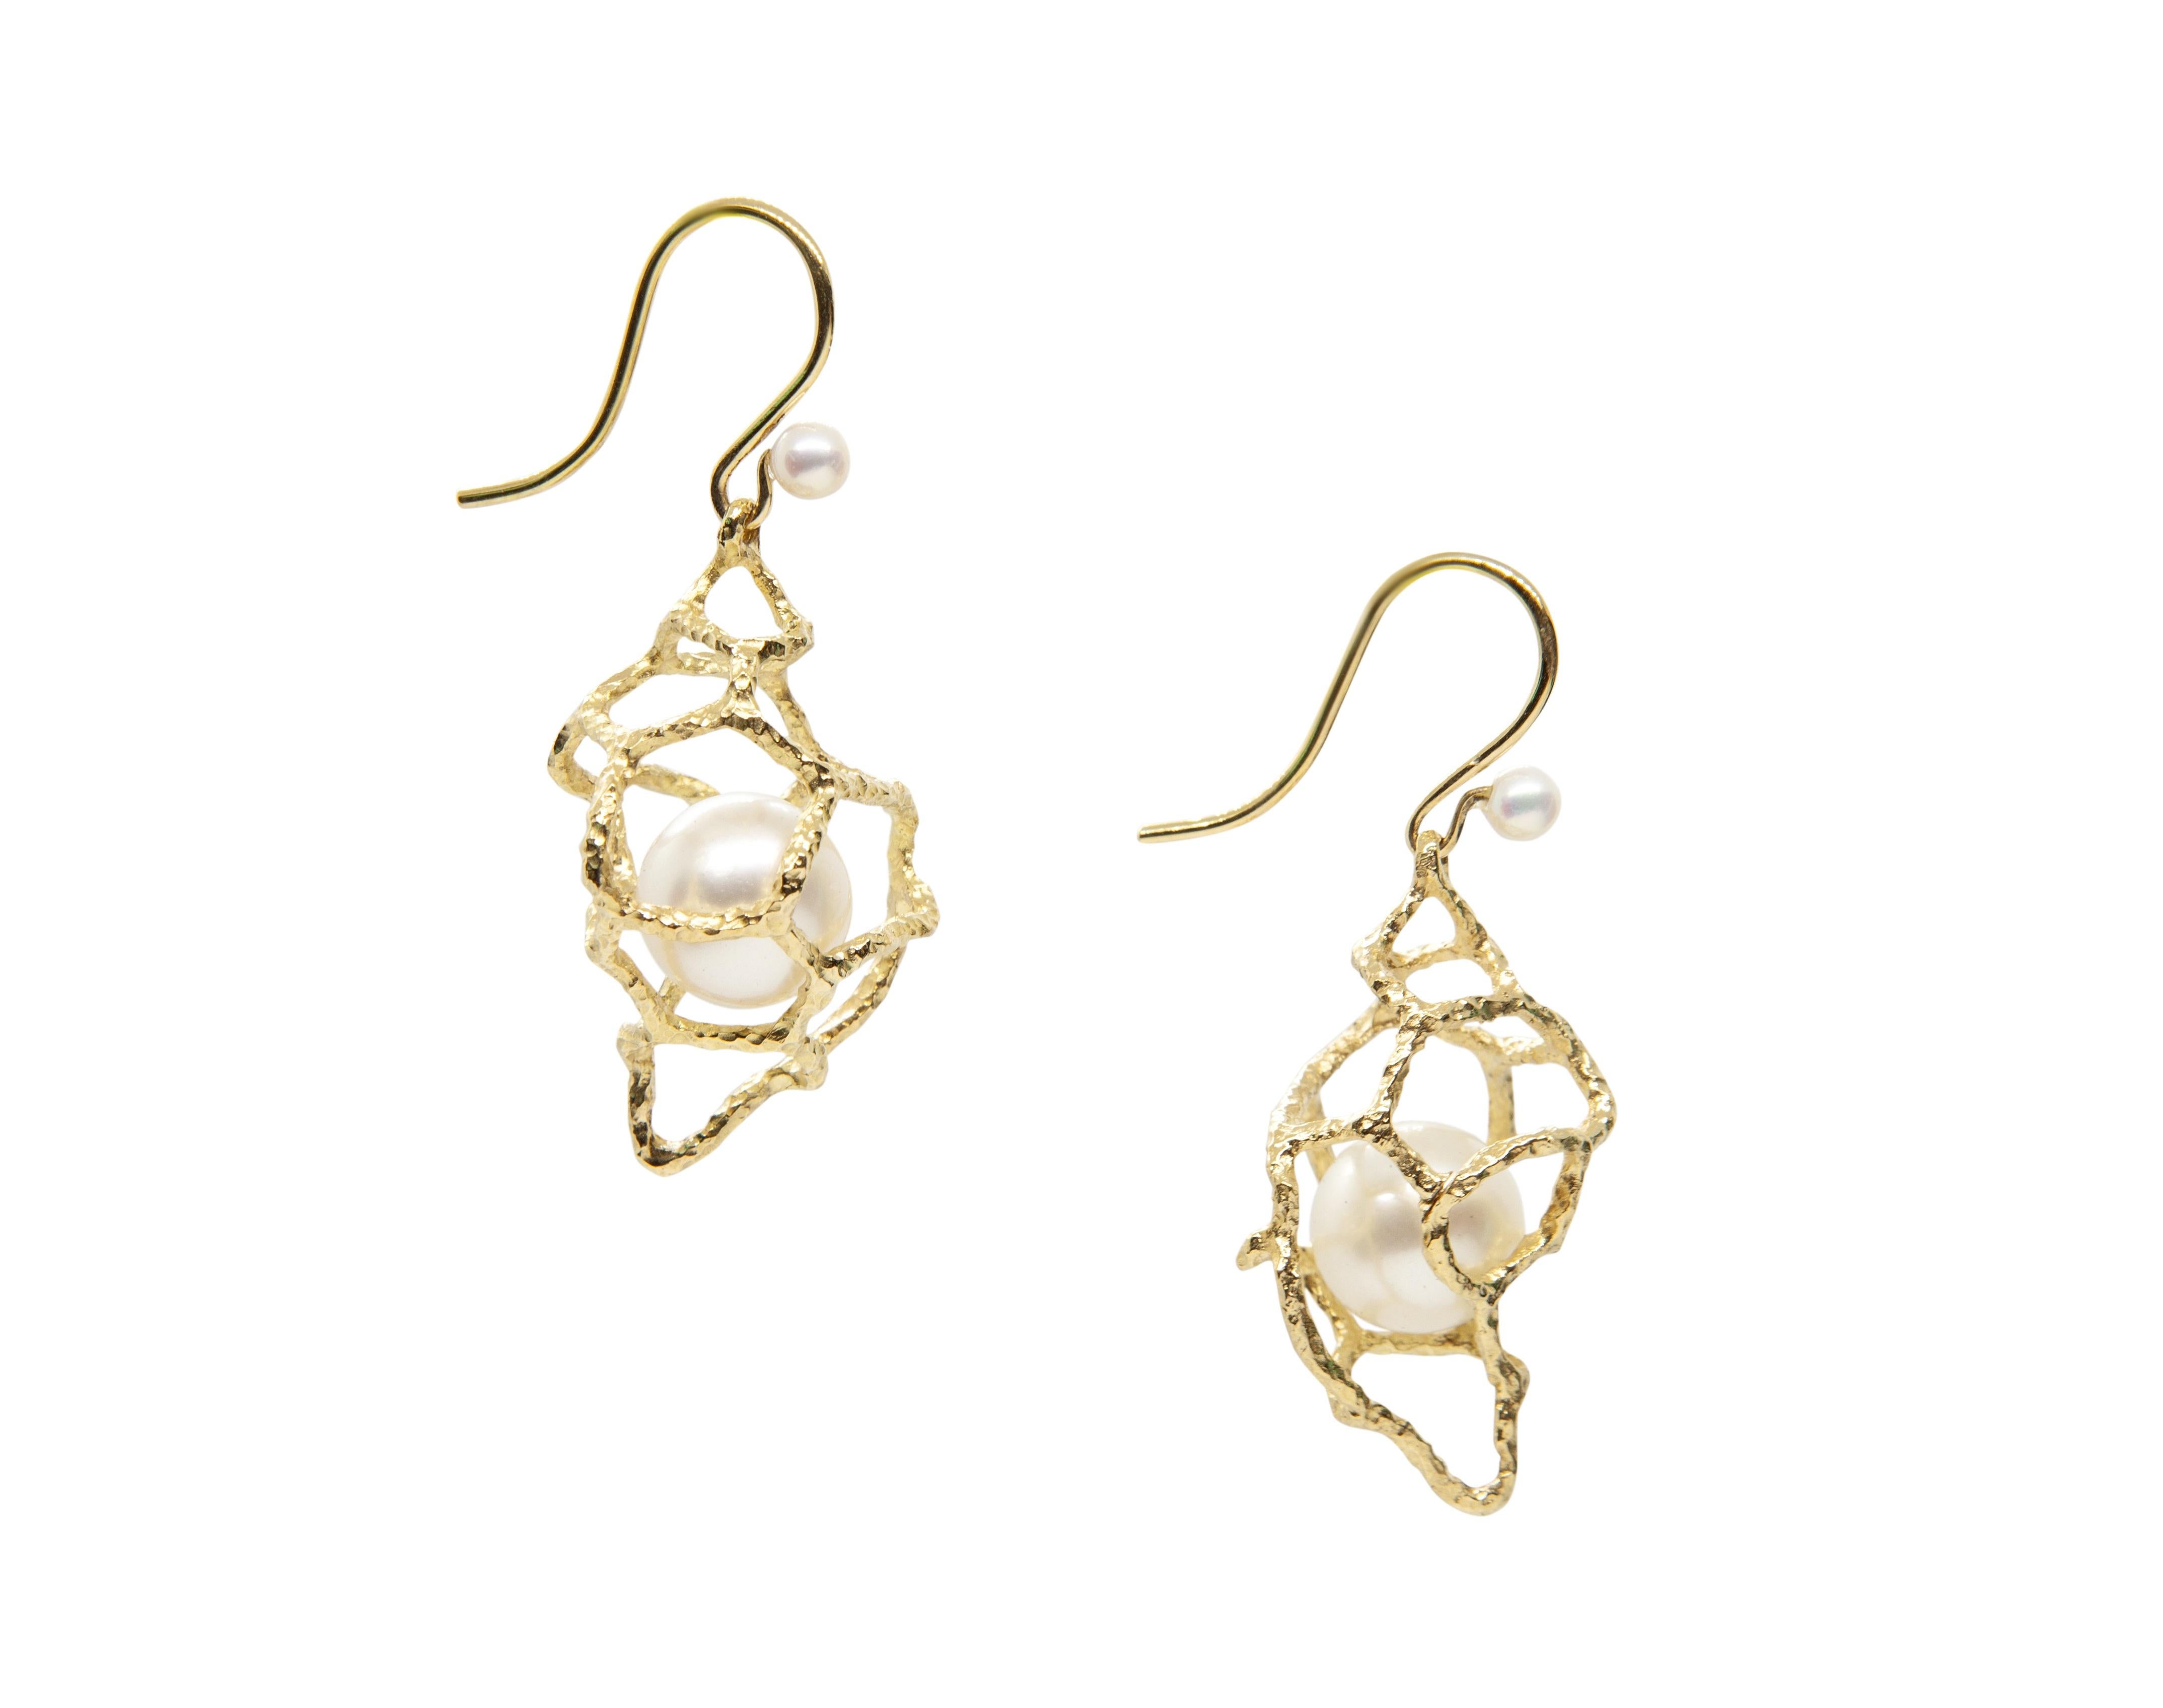 This pair of earrings are from Lingjun's 'FISSURE' collection, inspired by the conch shell in the sea, embracing the fine round white Australian South Sea pearls, celebrating the vibrant life of our oceans.

The organic lines of gold were hand